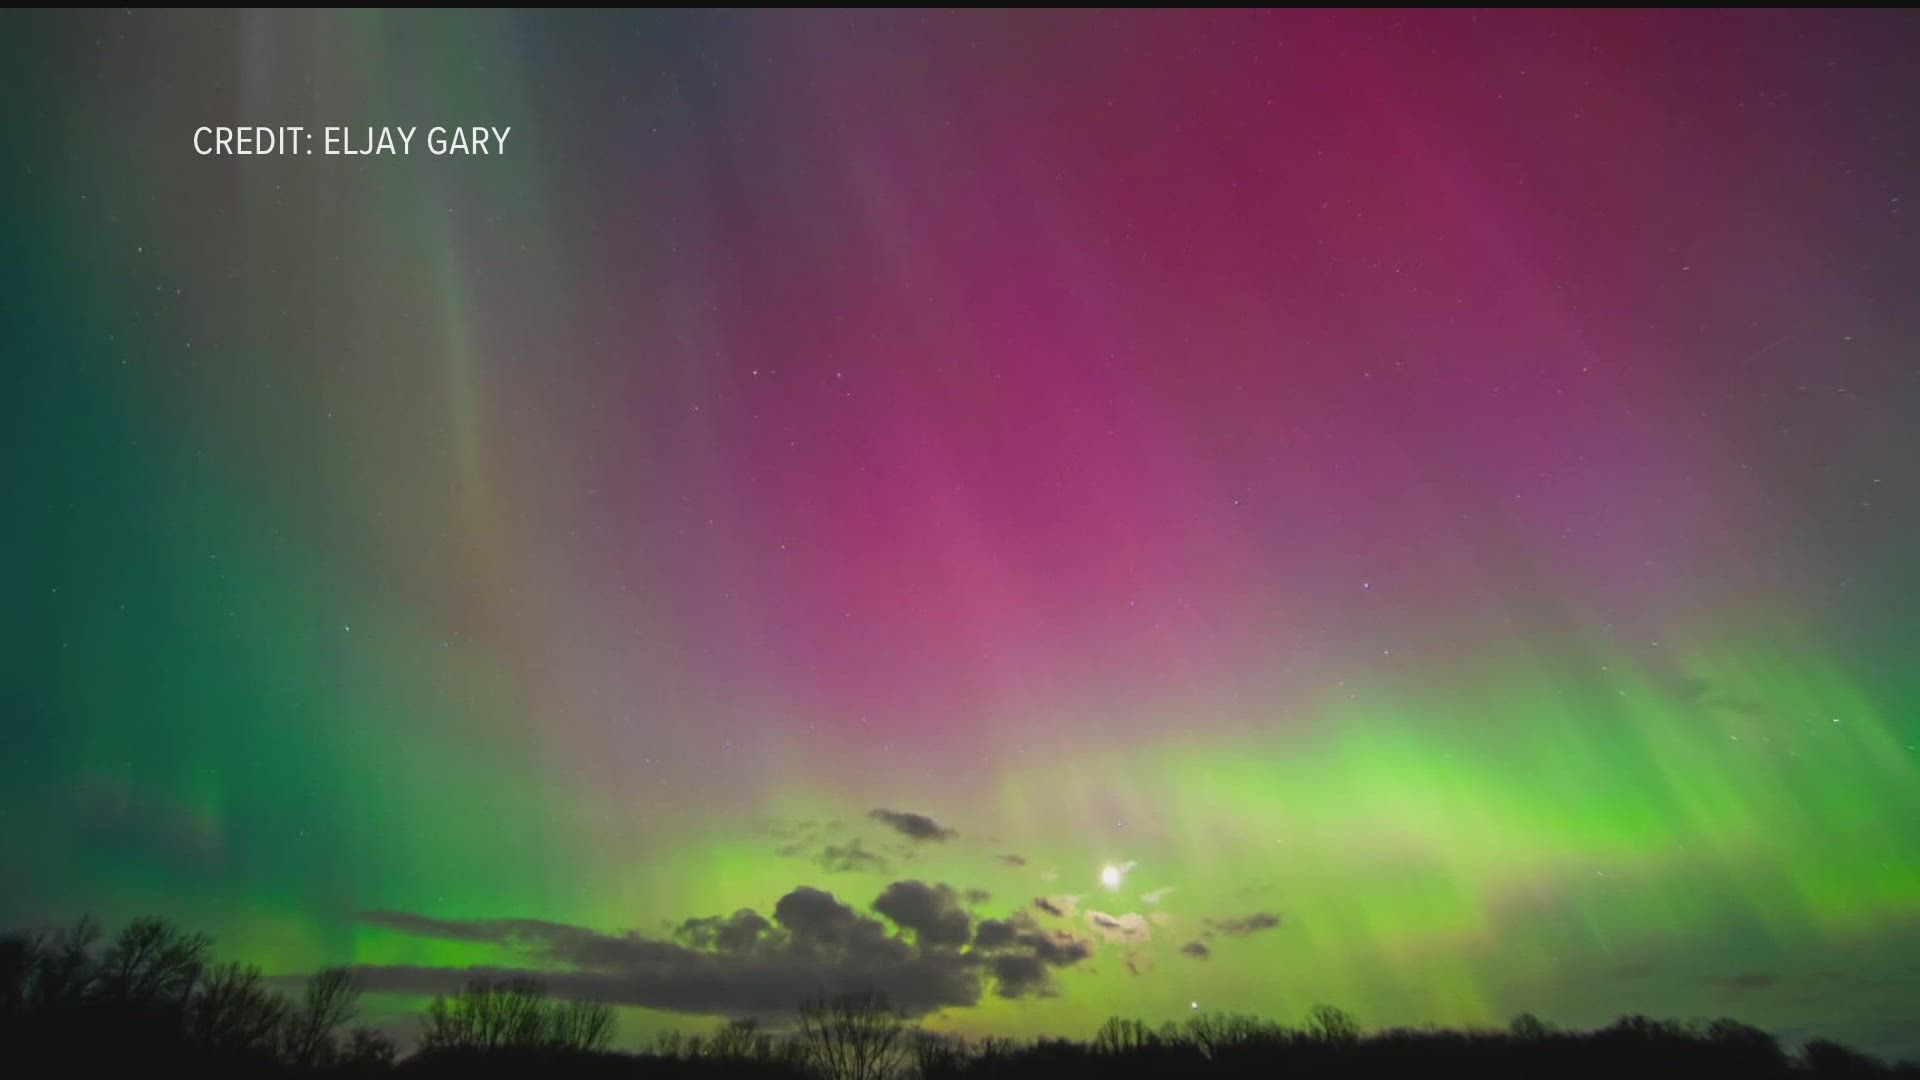 The Aurora Borealis or Northern Lights put on a beautiful show across parts of Minnesota and Wisconsin Sunday night.